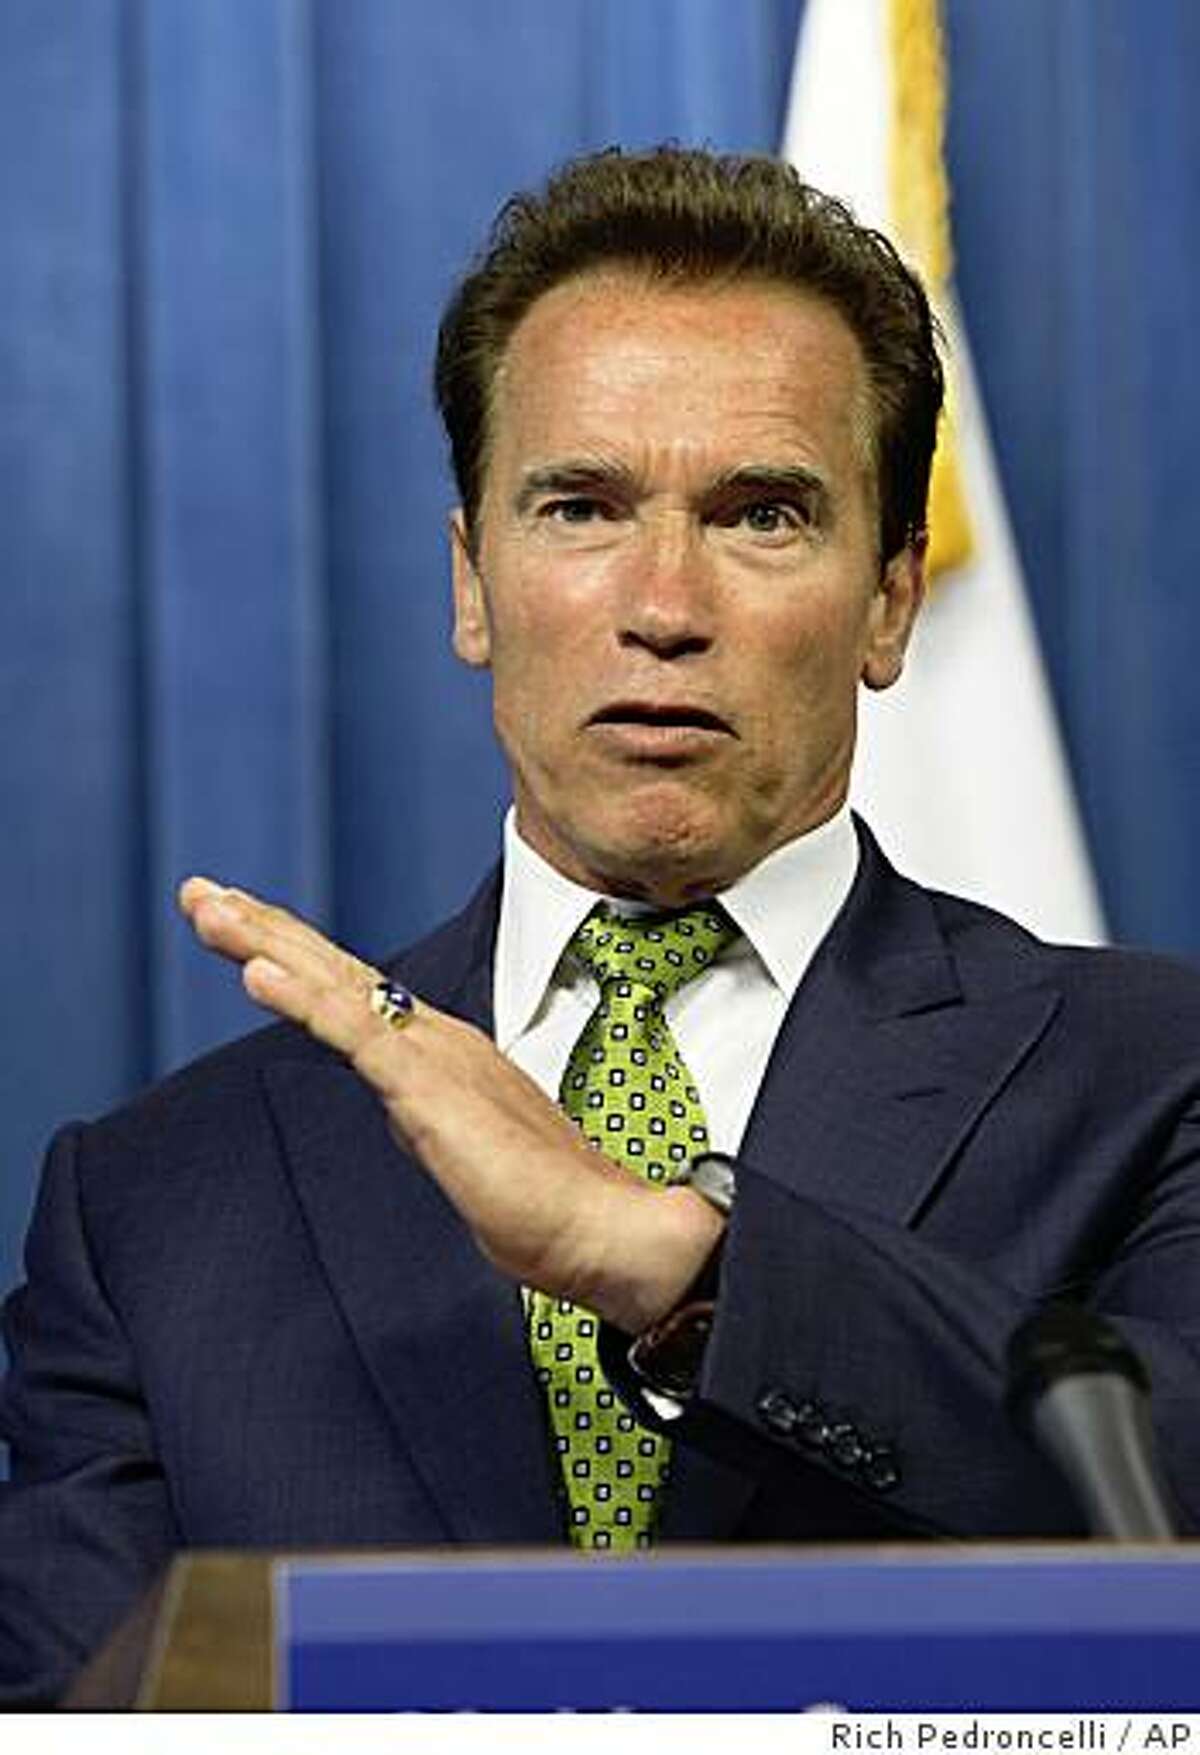 Gov. Arnold Schwarzenegger gestures as he defends his proposals to reform welfare and other social programs as negotiations over closing California's $26.3 billion deficit during a Capitol news conference in Sacramento, Calif., Wednesday, July 8, 2009.(AP Photo/Rich Pedroncelli)